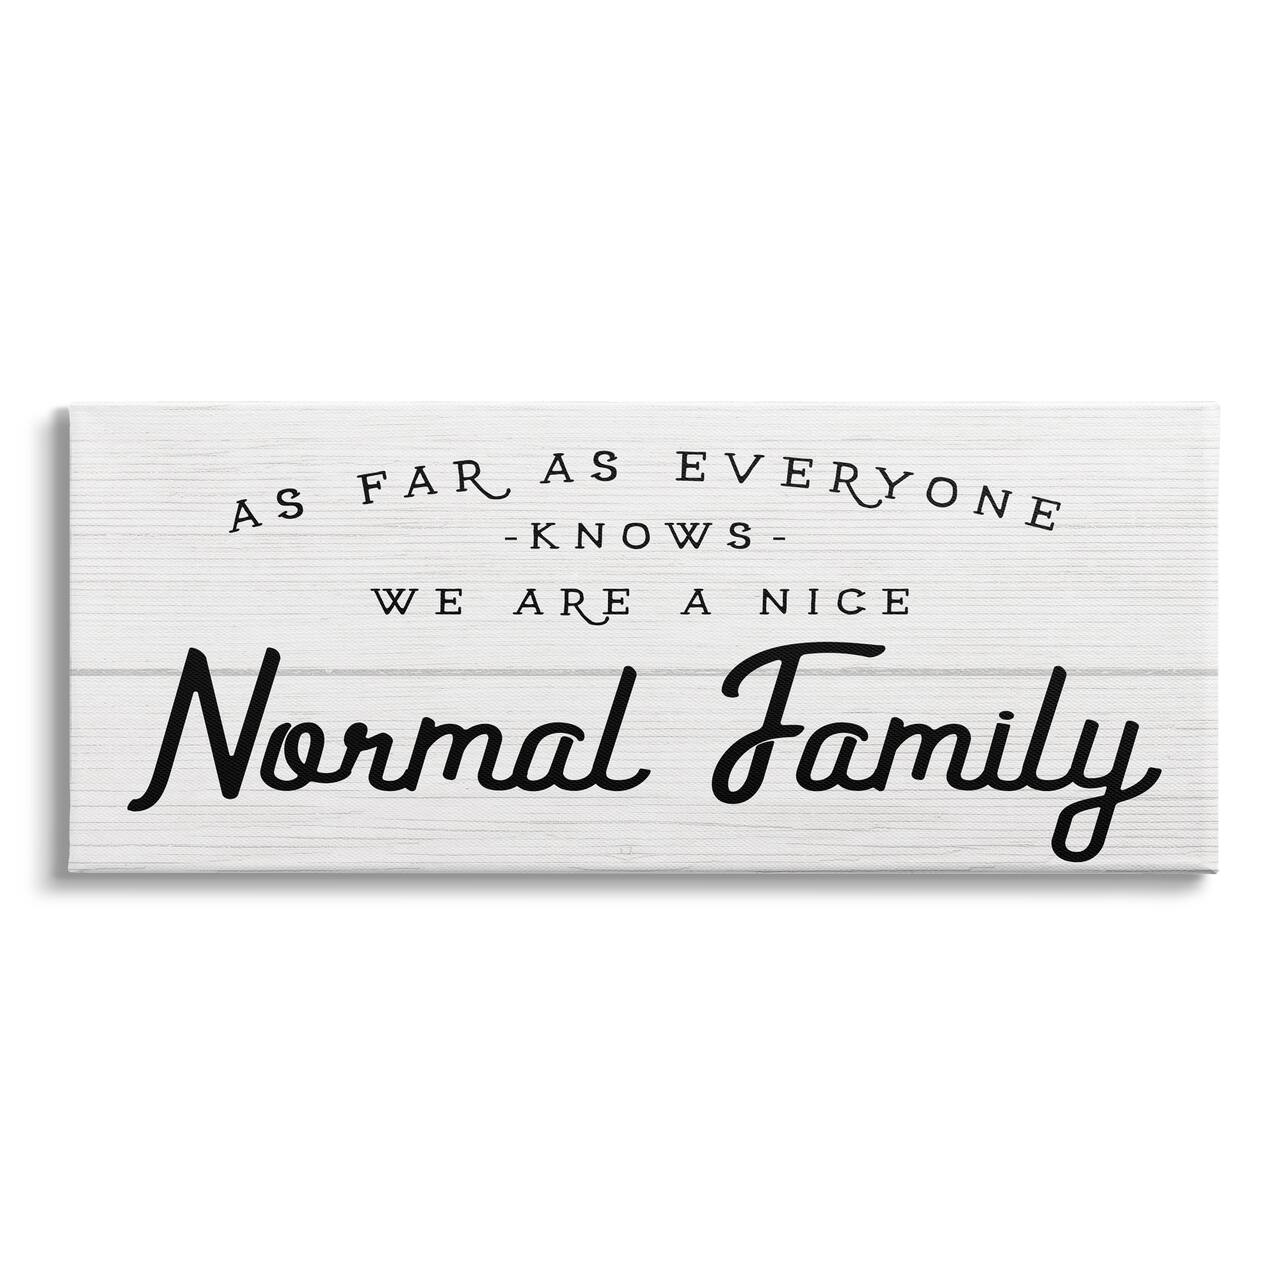 Stupell Industries Nice Normal Family Phrase Funny Motivational Phrase Canvas Wall Art